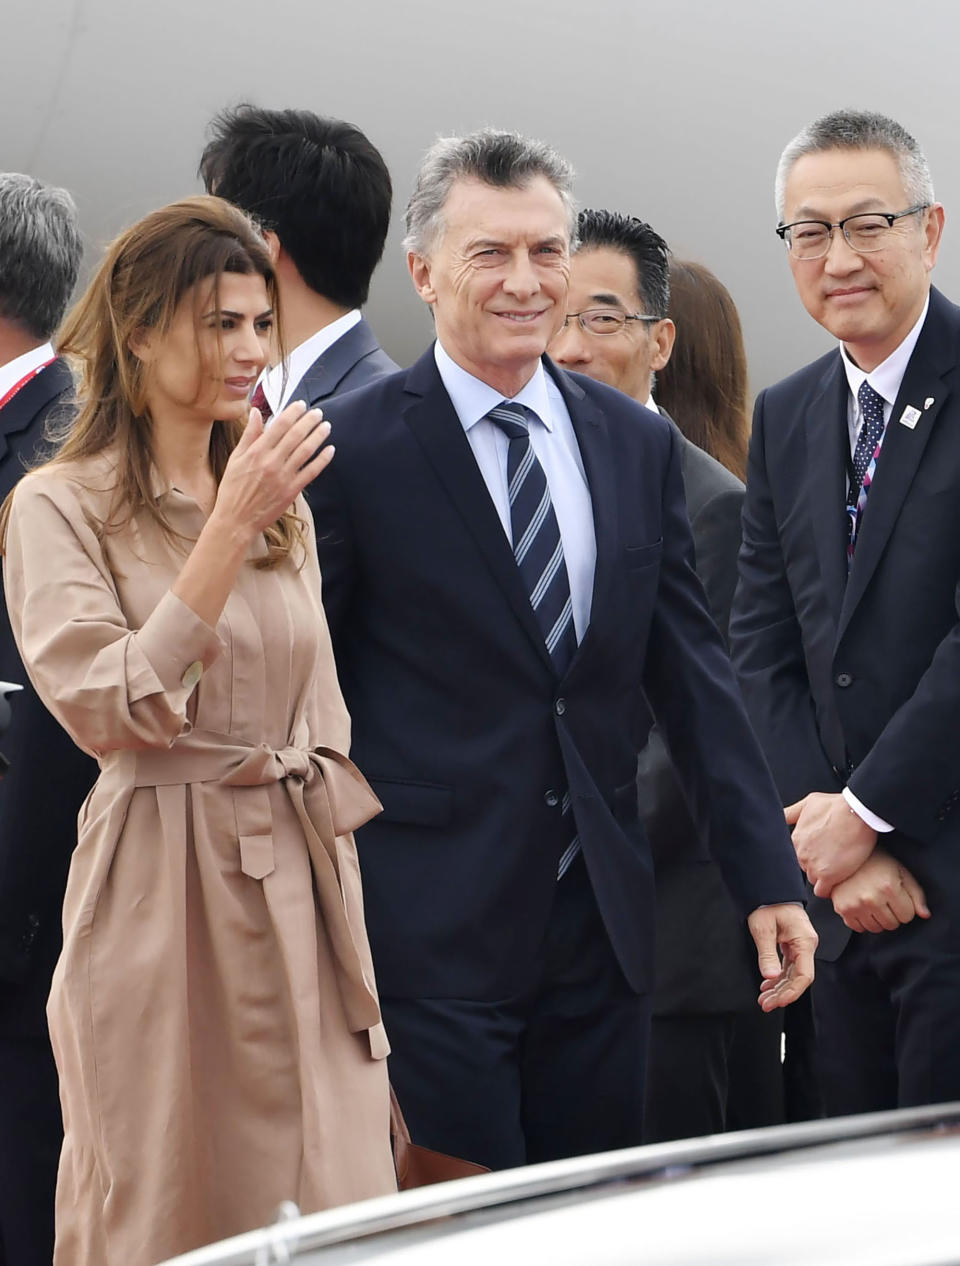 Argentina's President Mauricio Macri, center right, and his wife first lady Juliana Awada arrive at Kansai International Airport in Izumisano, Osaka prefecture, western Japan, Thursday, June 27, 2019. Group of 20 leaders gather in Osaka on June 28 and 29 for their annual summit.(Nobuki Ito/Kyodo News via AP)